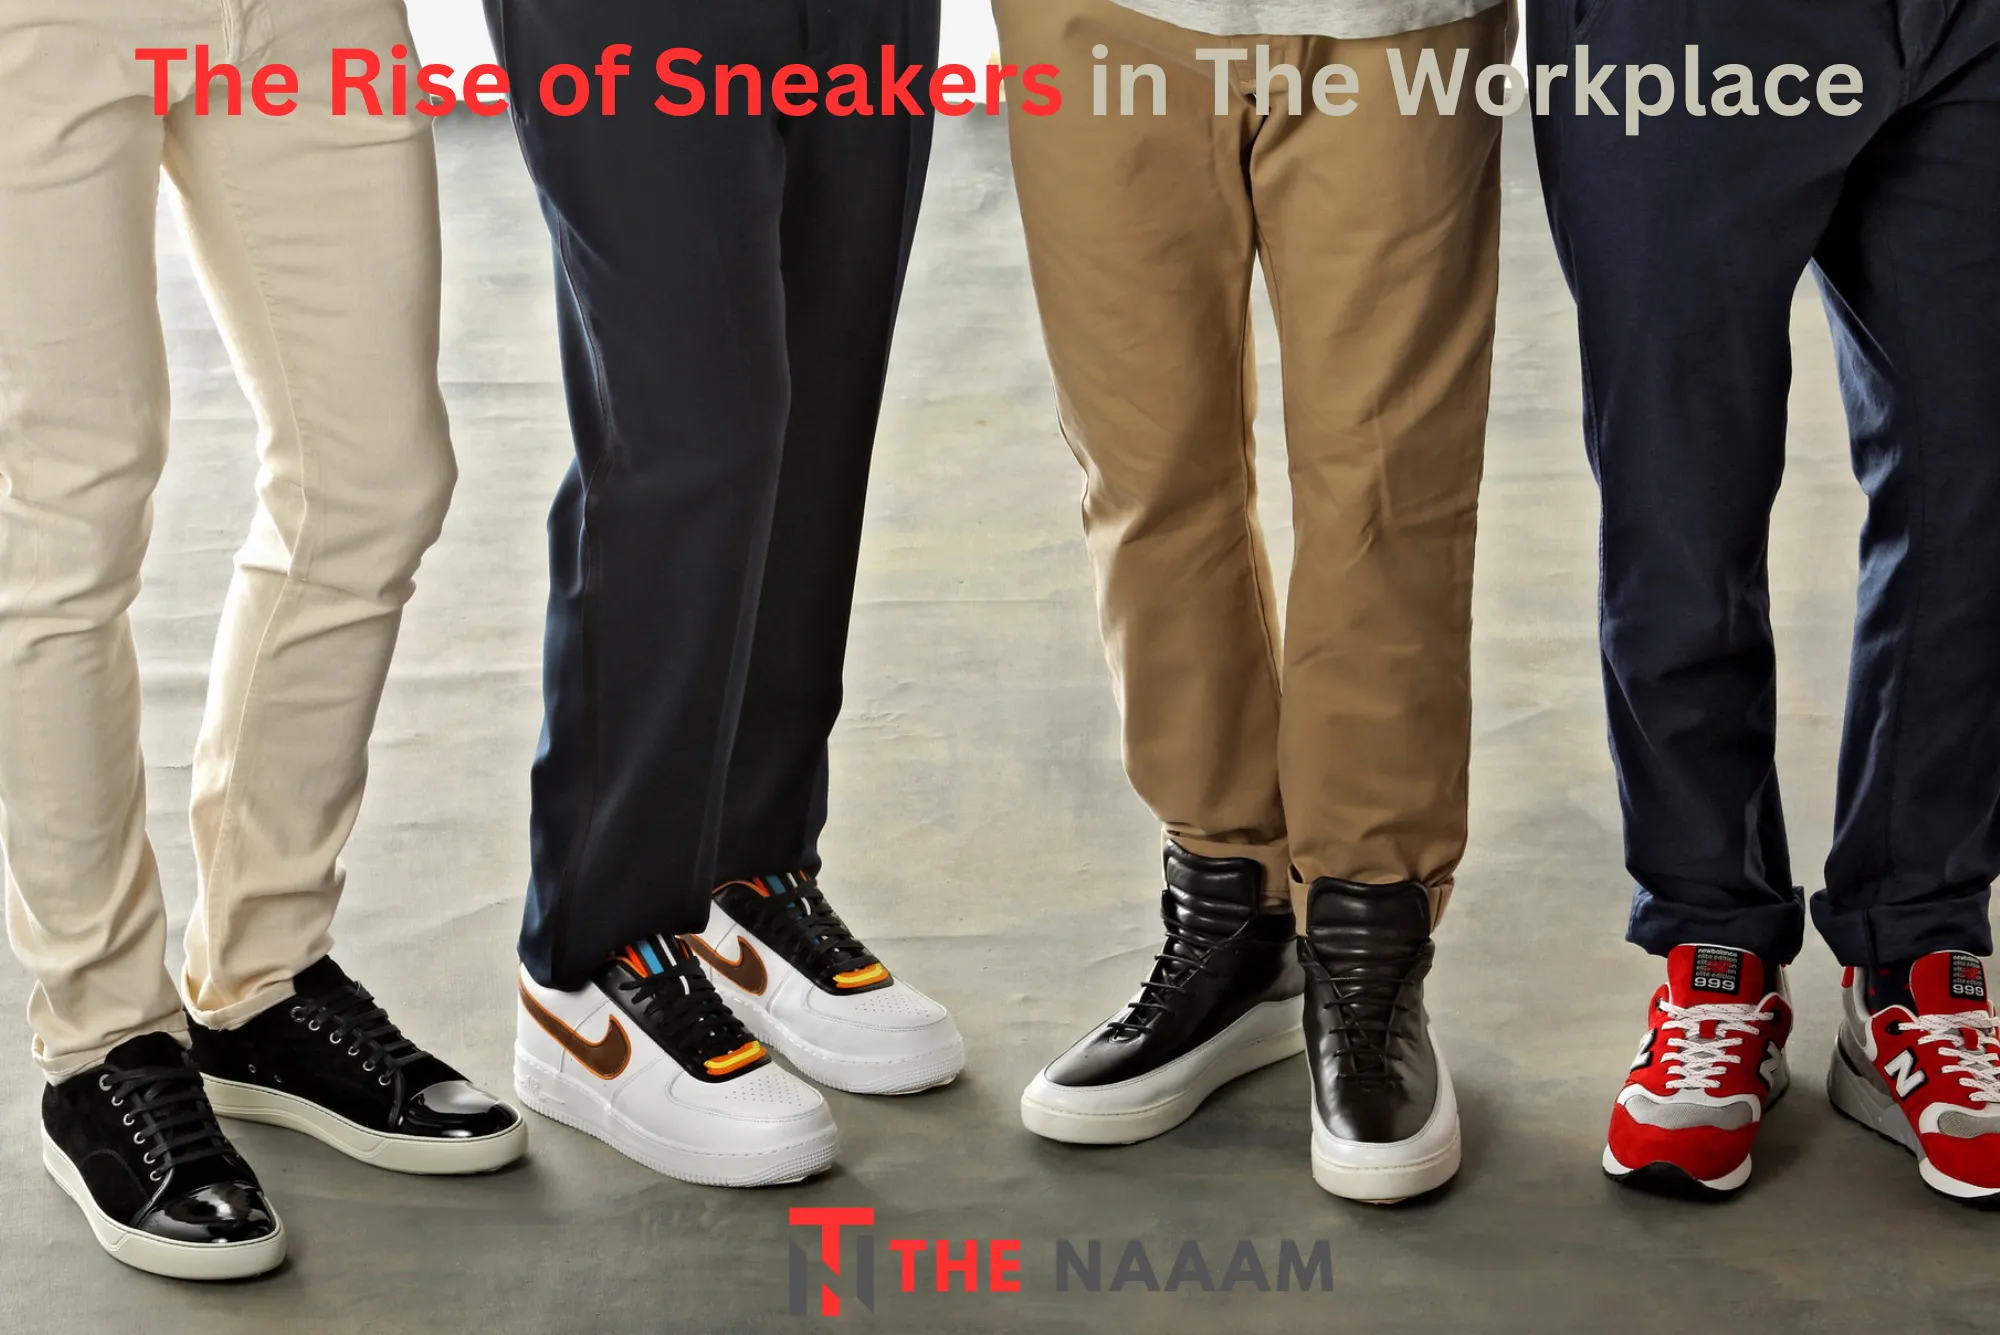 The Rise of Sneakers in the Workplace